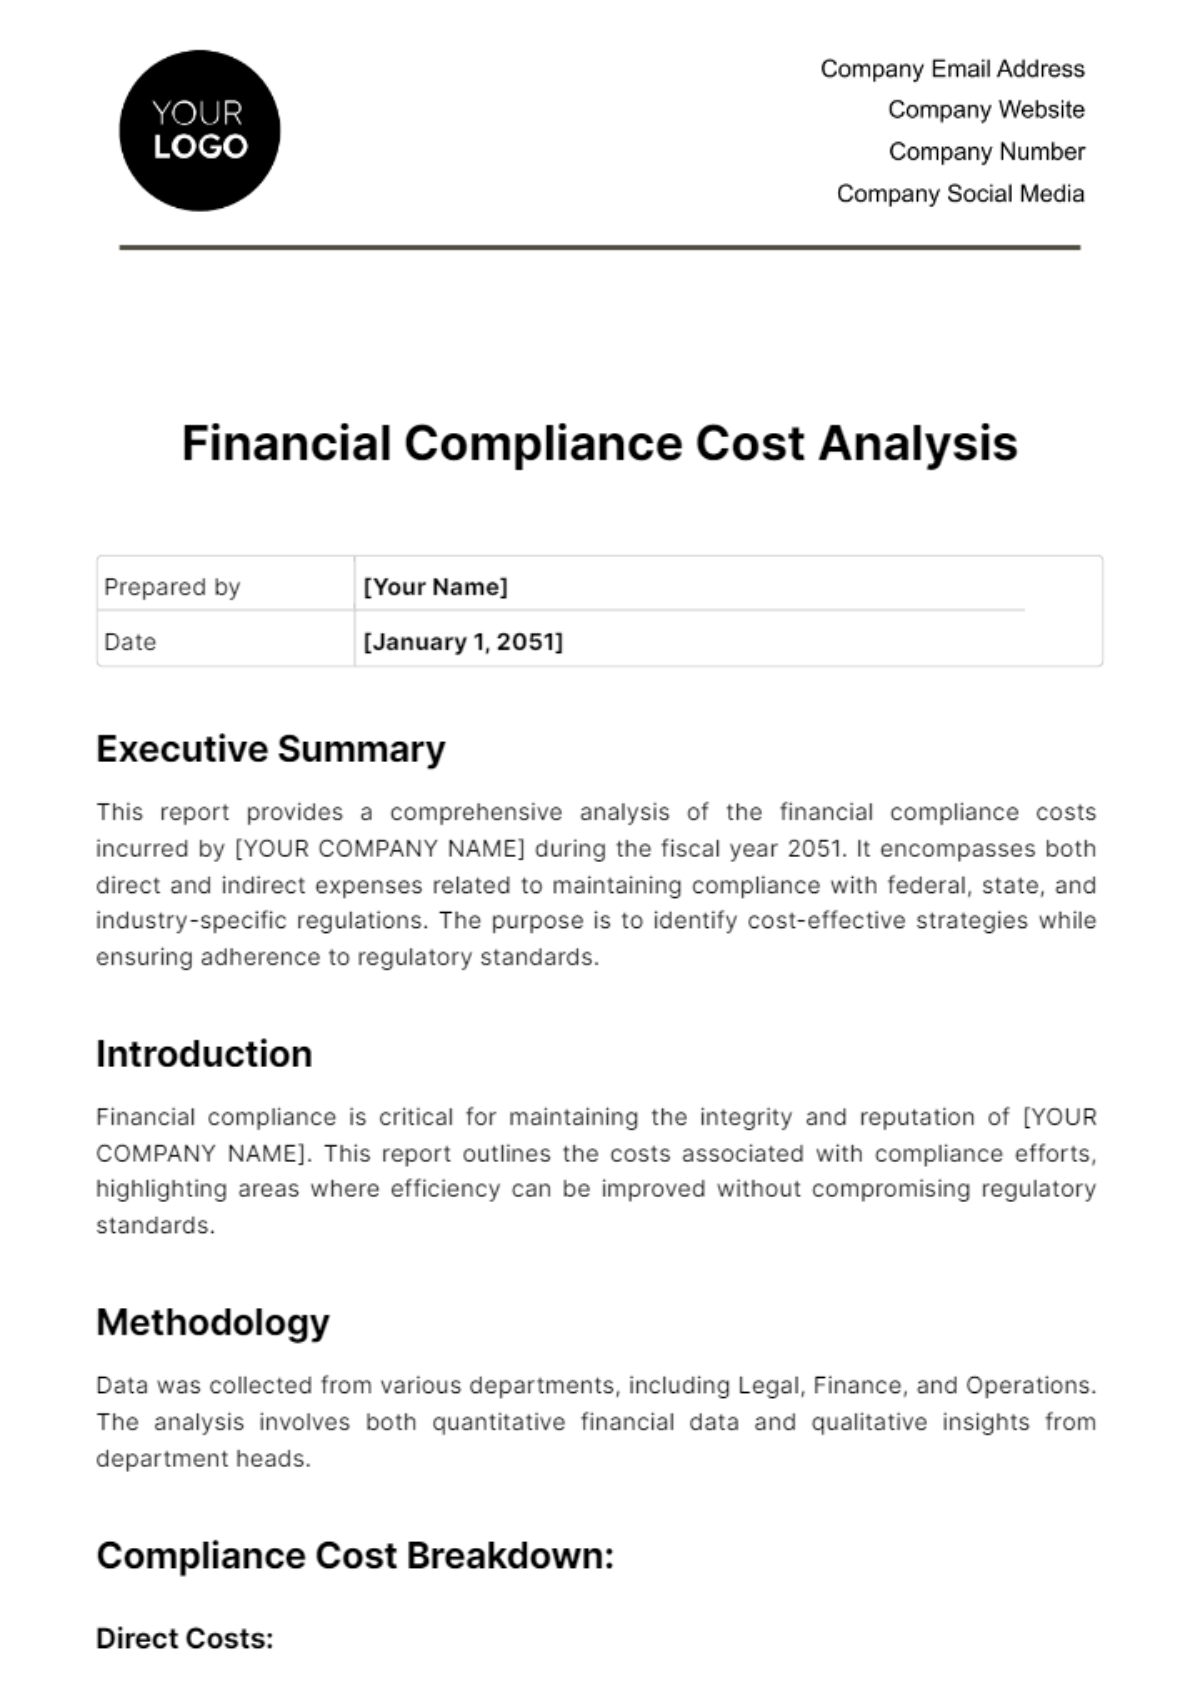 Free Financial Compliance Cost Analysis Template